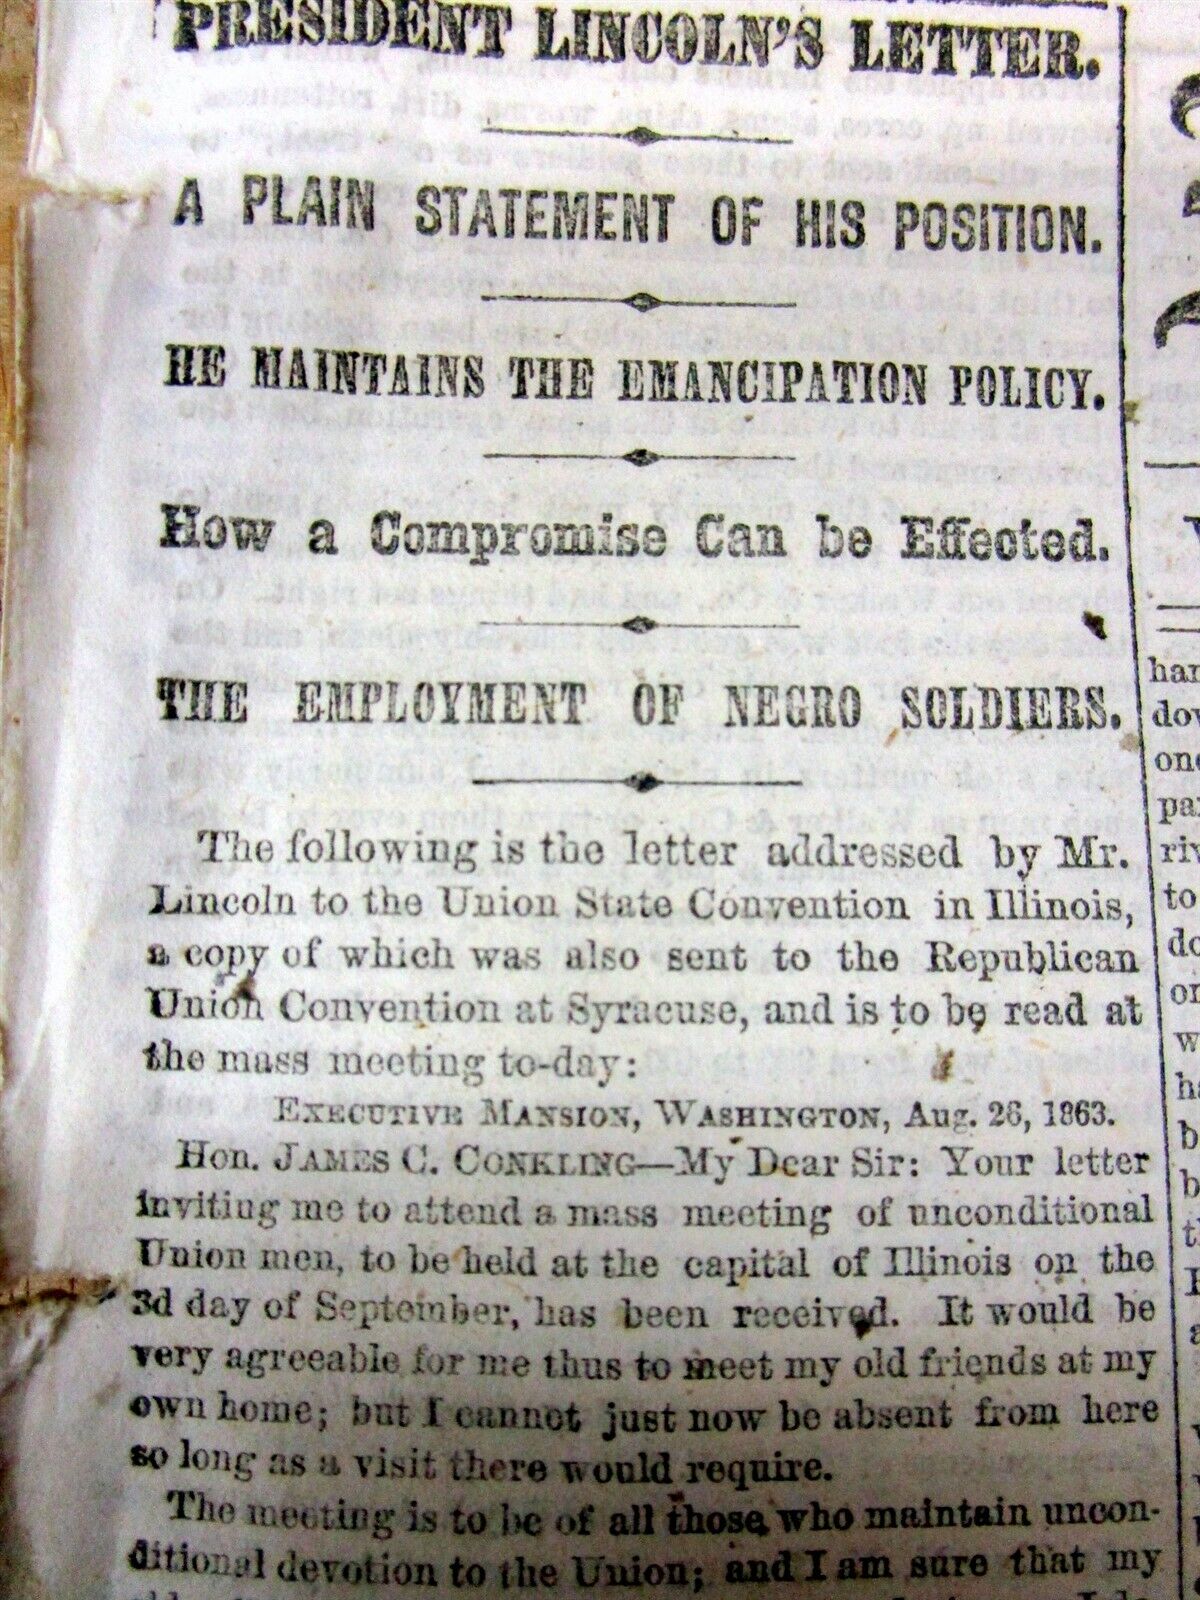 1863 Civil War newspaper w ABRAHAM LINCOLN LETTER on NEGR0 SOLDIERS in the ARMY